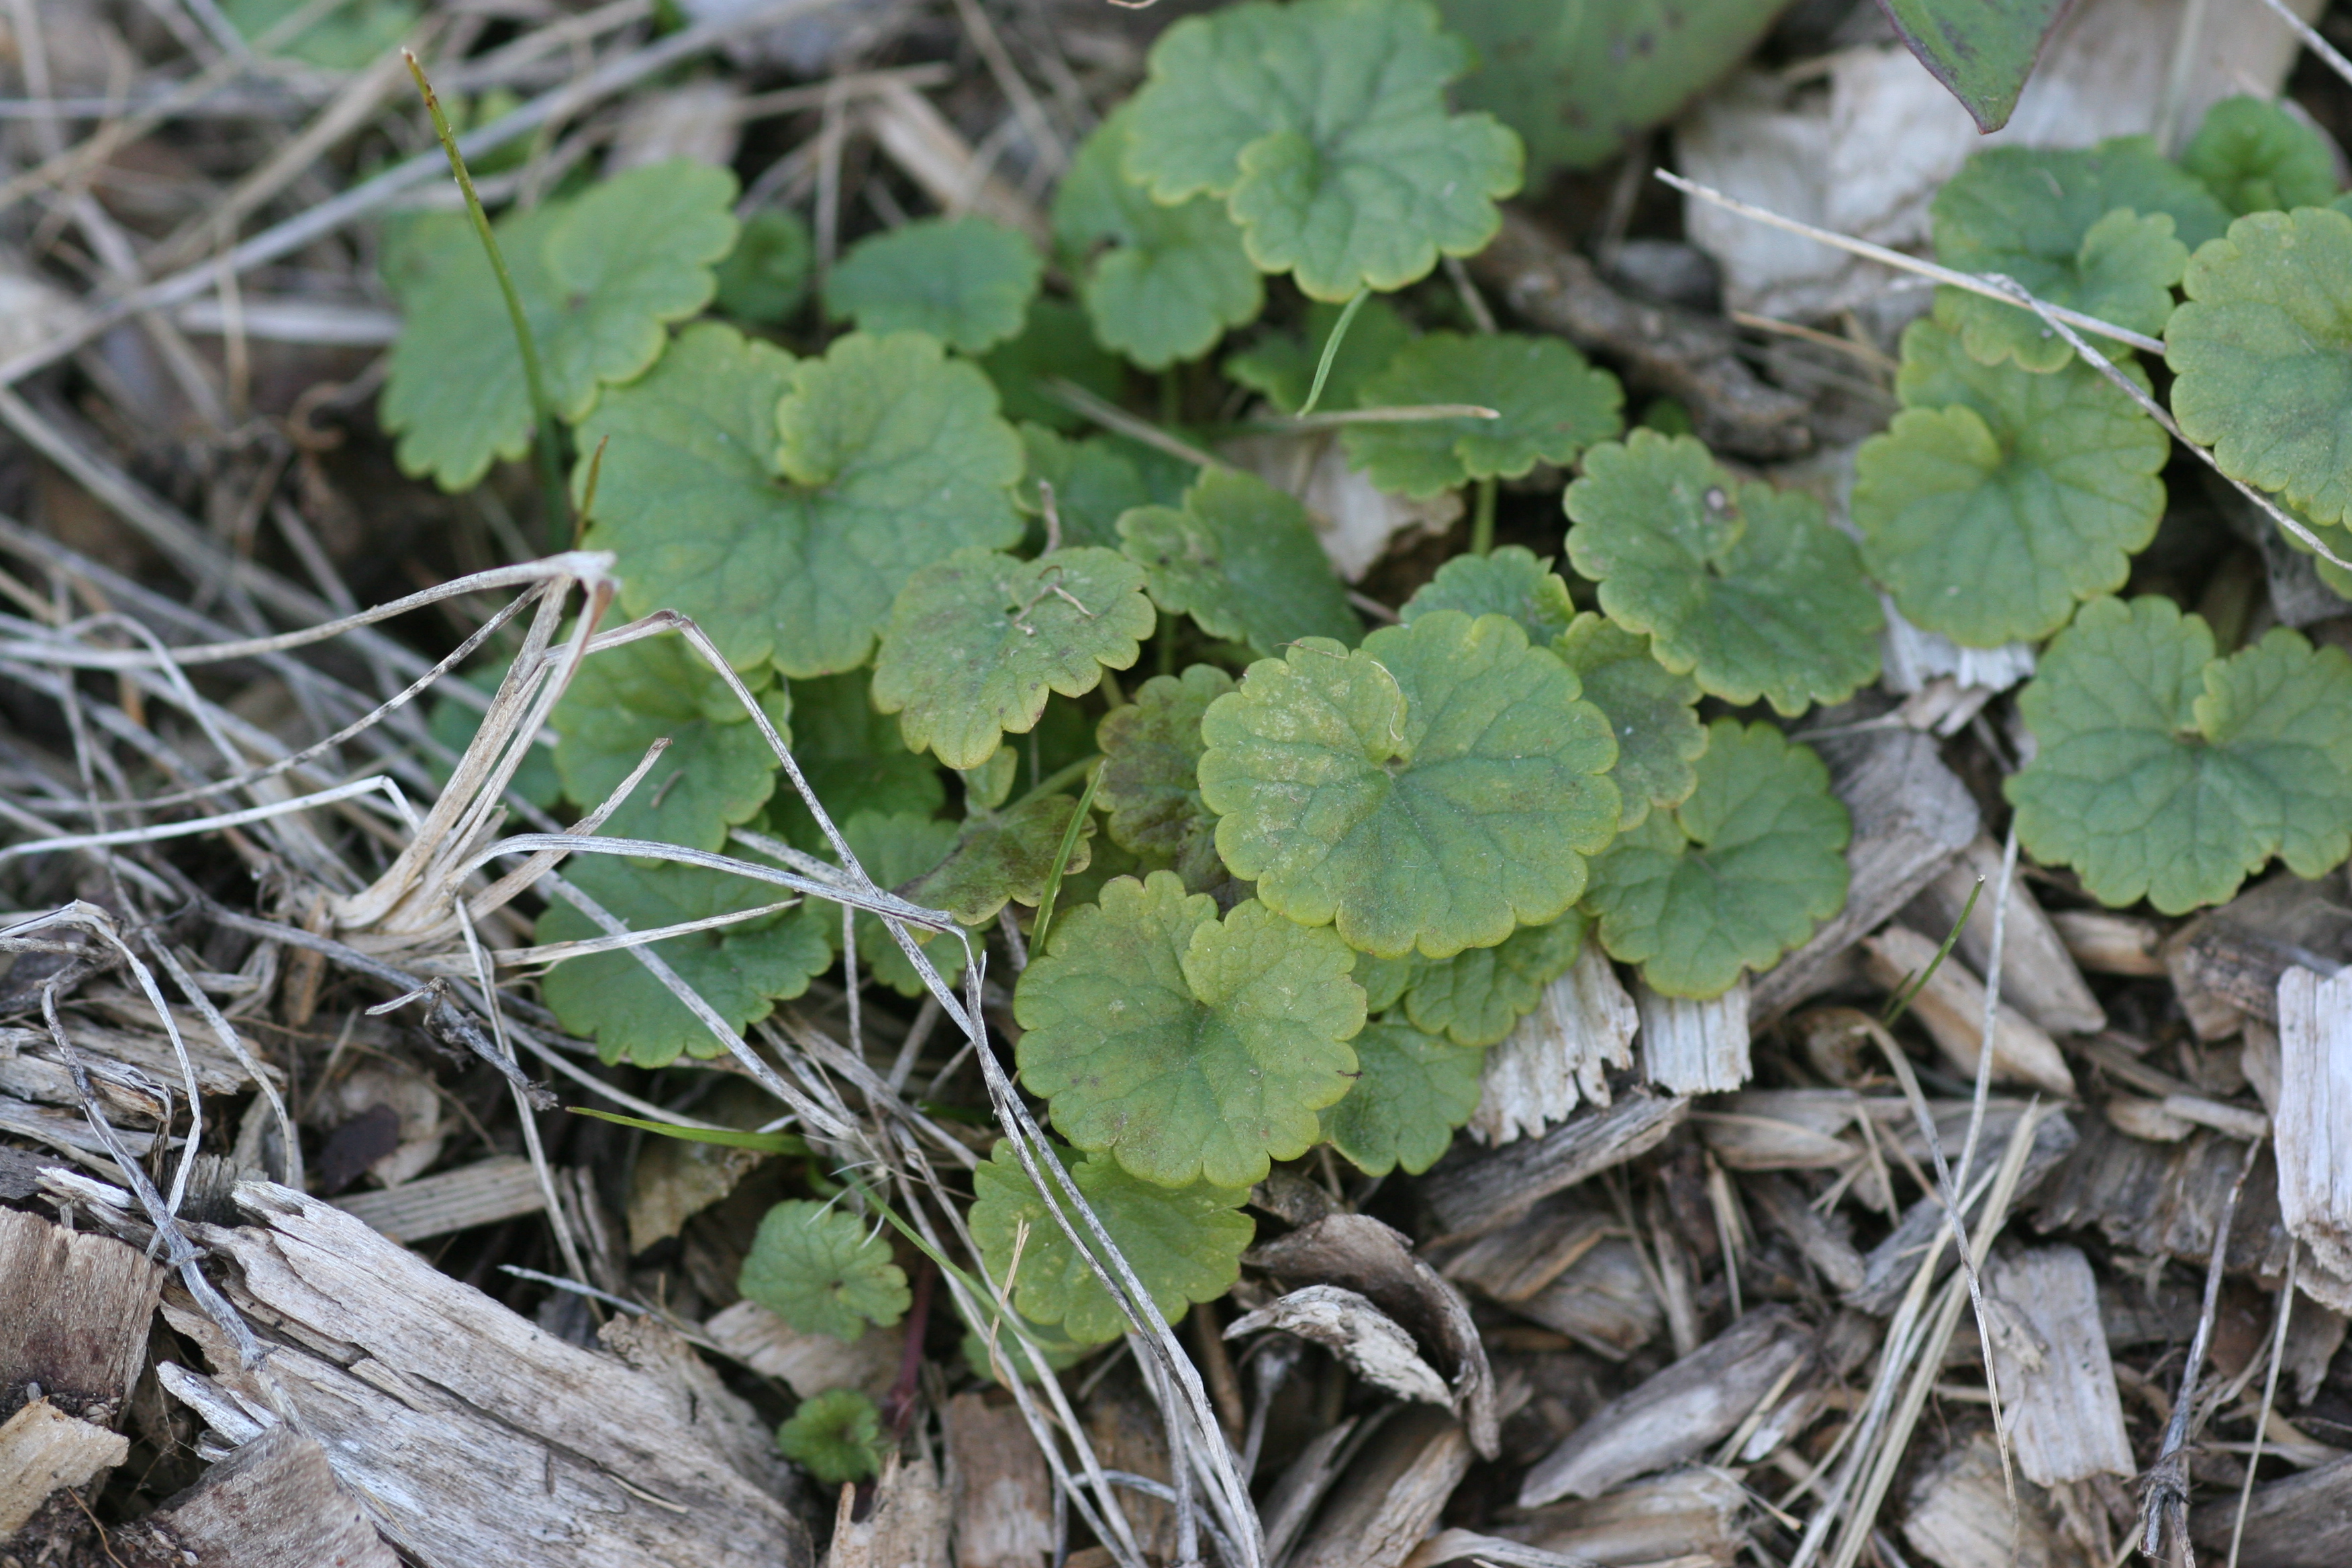 Image of Creeping Charlie plant with small, round leaves